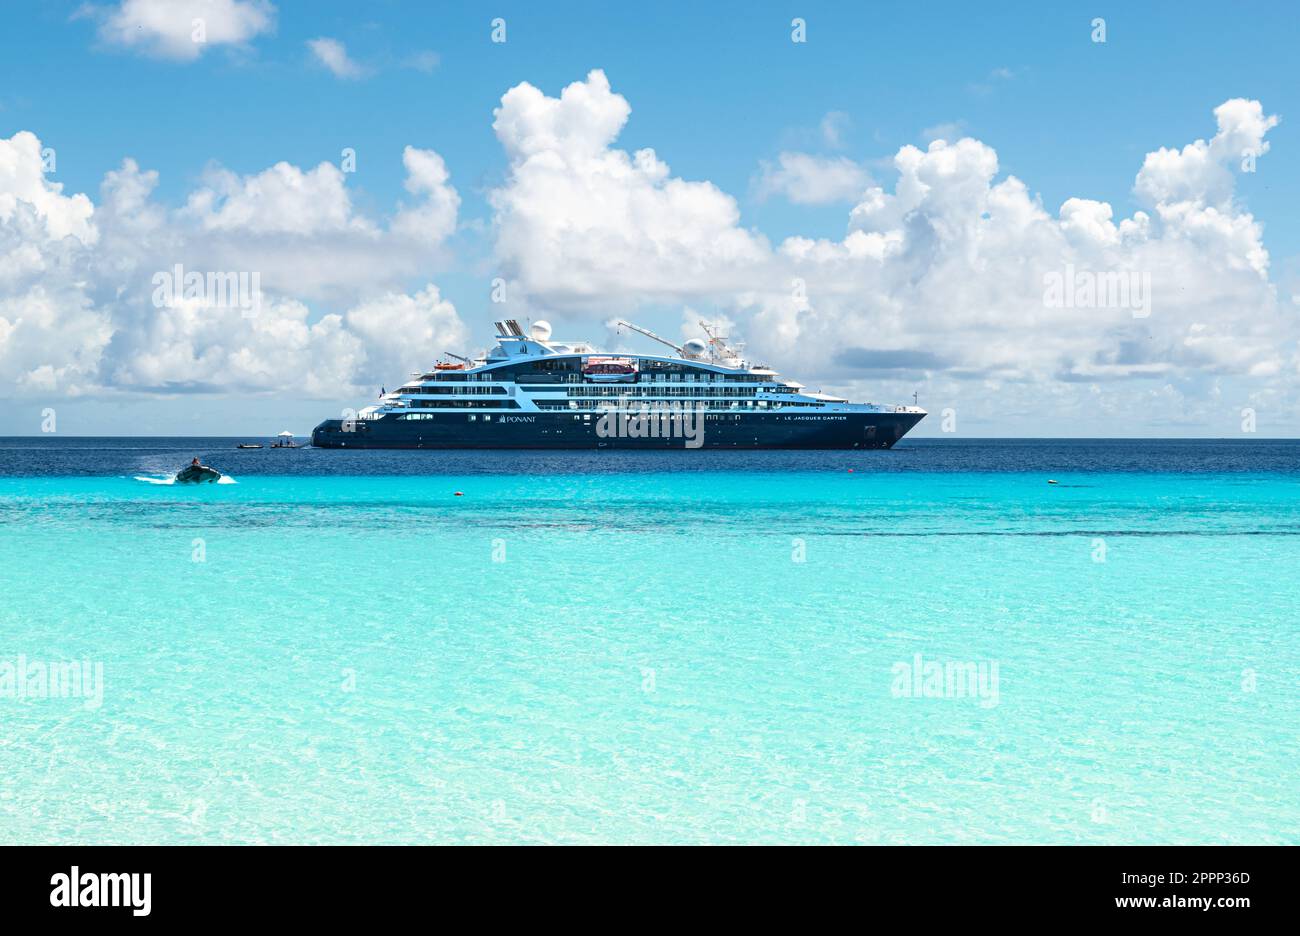 ASSUMPTION ISLAND, SEYCHELLES - MARCH 30, 2023: Expedition Cruise Ship Jacques Cartier of Ponant Cruises anchored at Assumption Island, Seychelles. Stock Photo